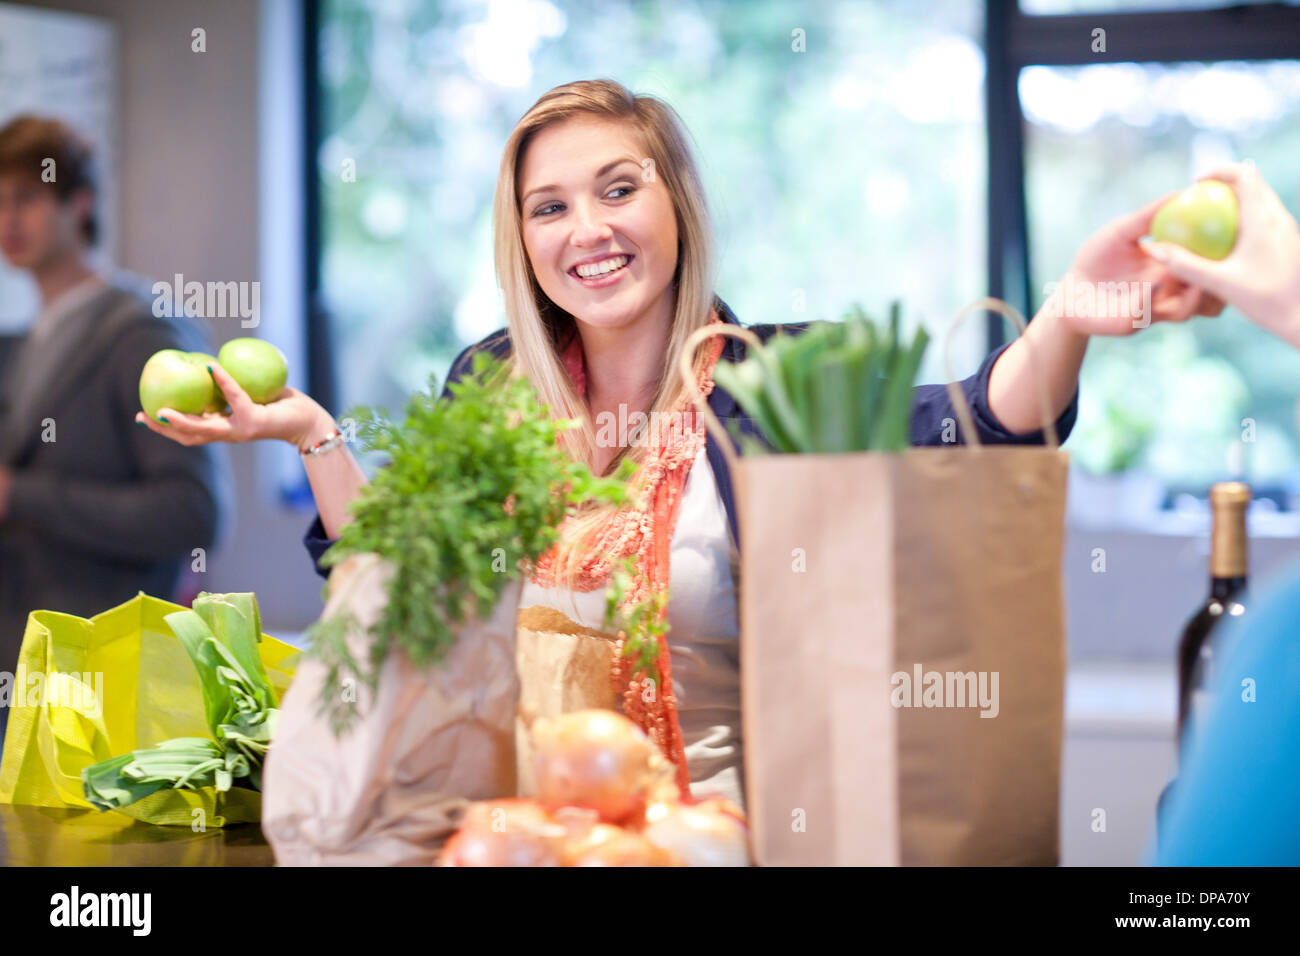 Young woman unpacking groceries Stock Photo